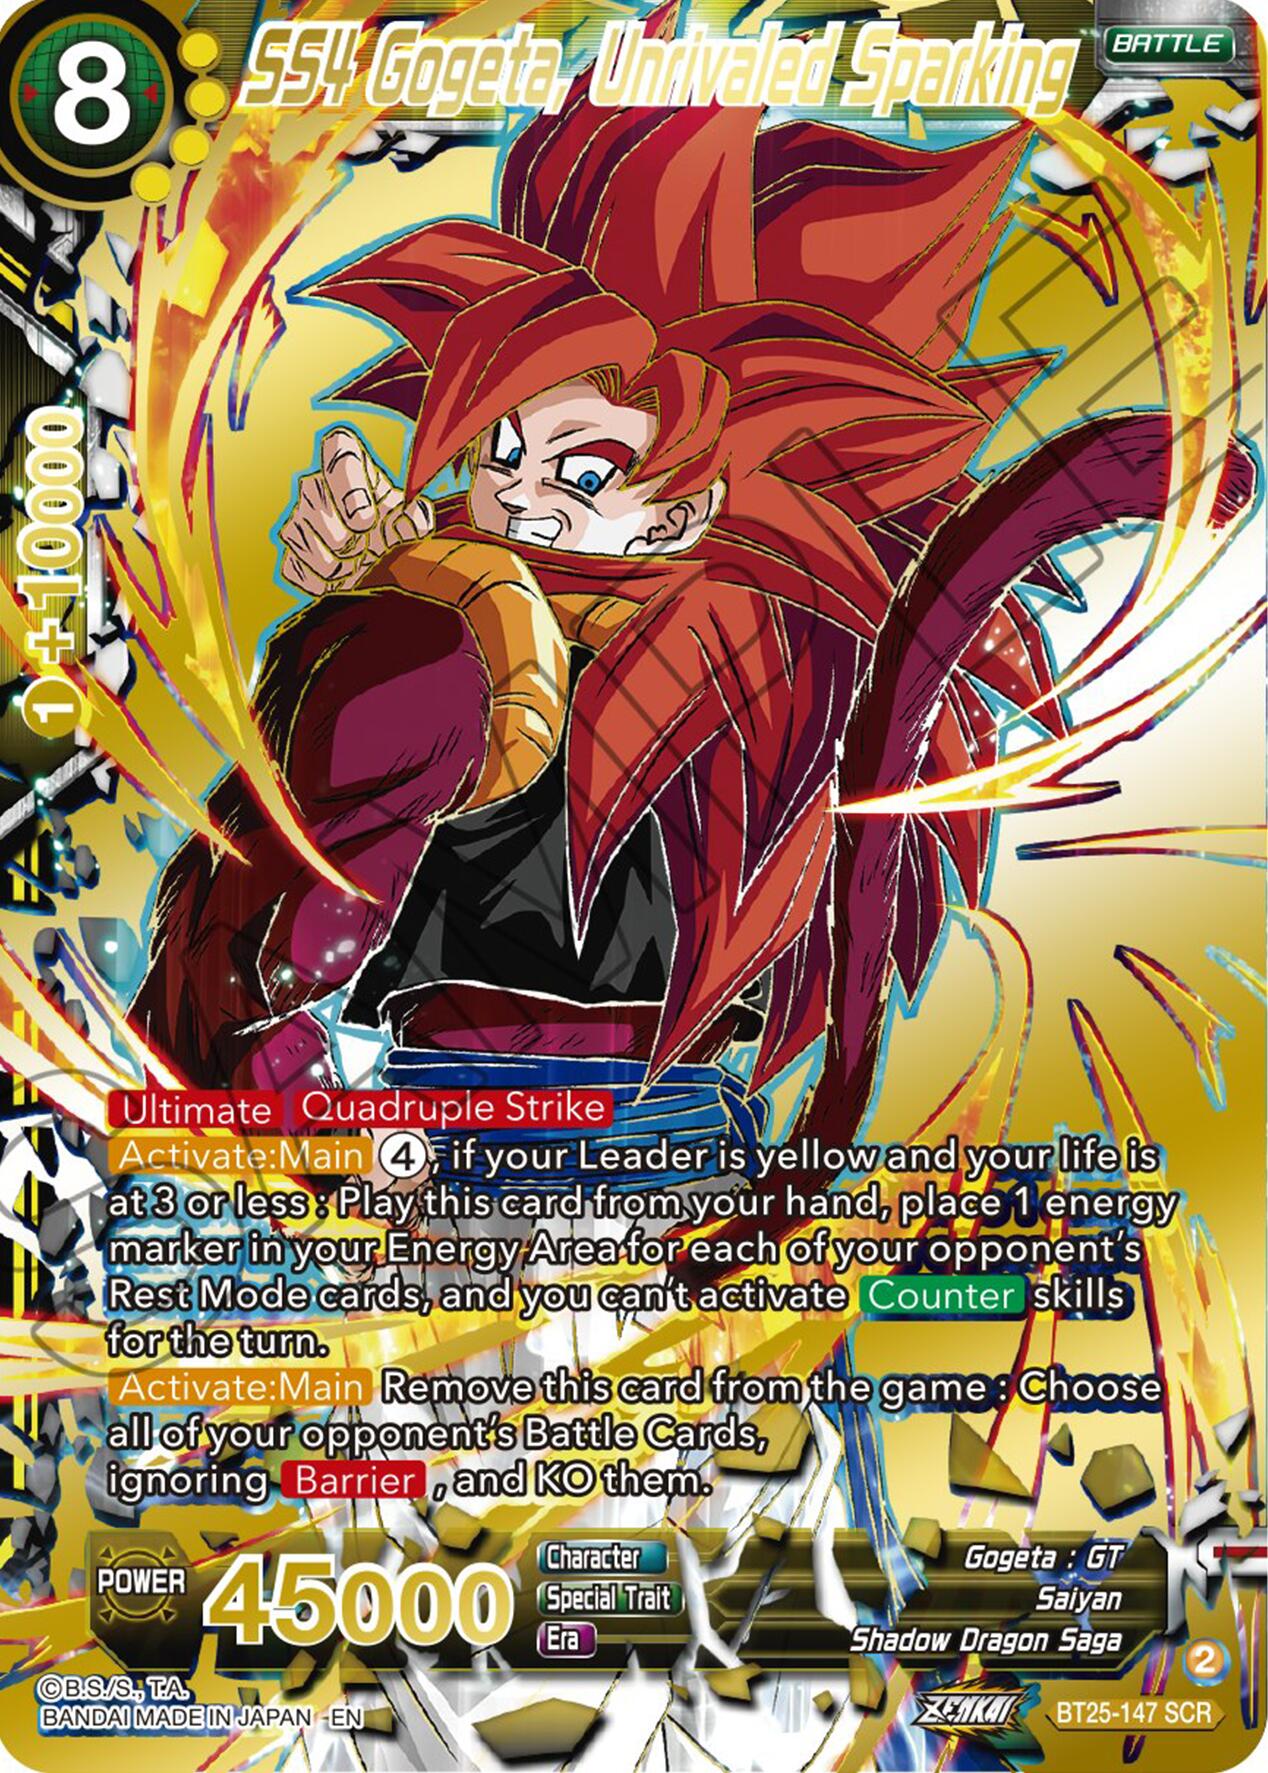 SS4 Gogeta, Unrivaled Sparking (BT25-147) [Legend of the Dragon Balls] | Red Riot Games CA